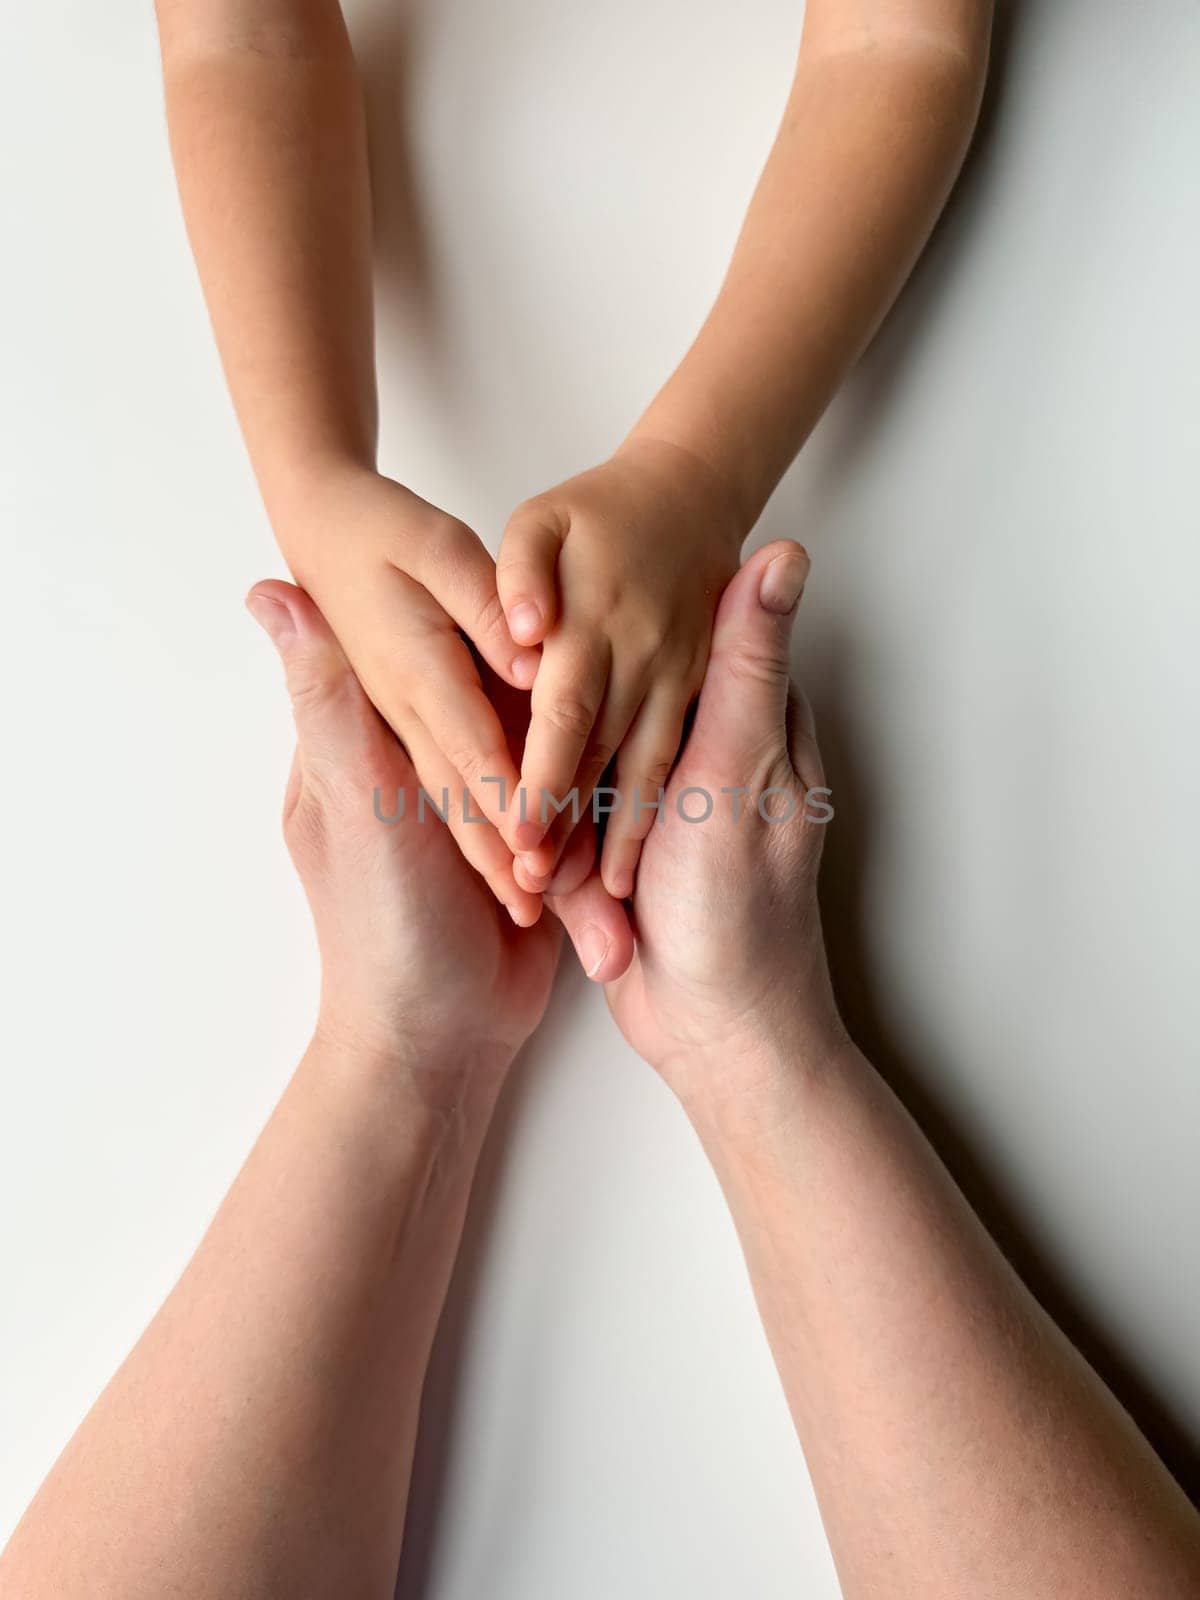 Mothers hands holding childs hands on white background. High quality photo